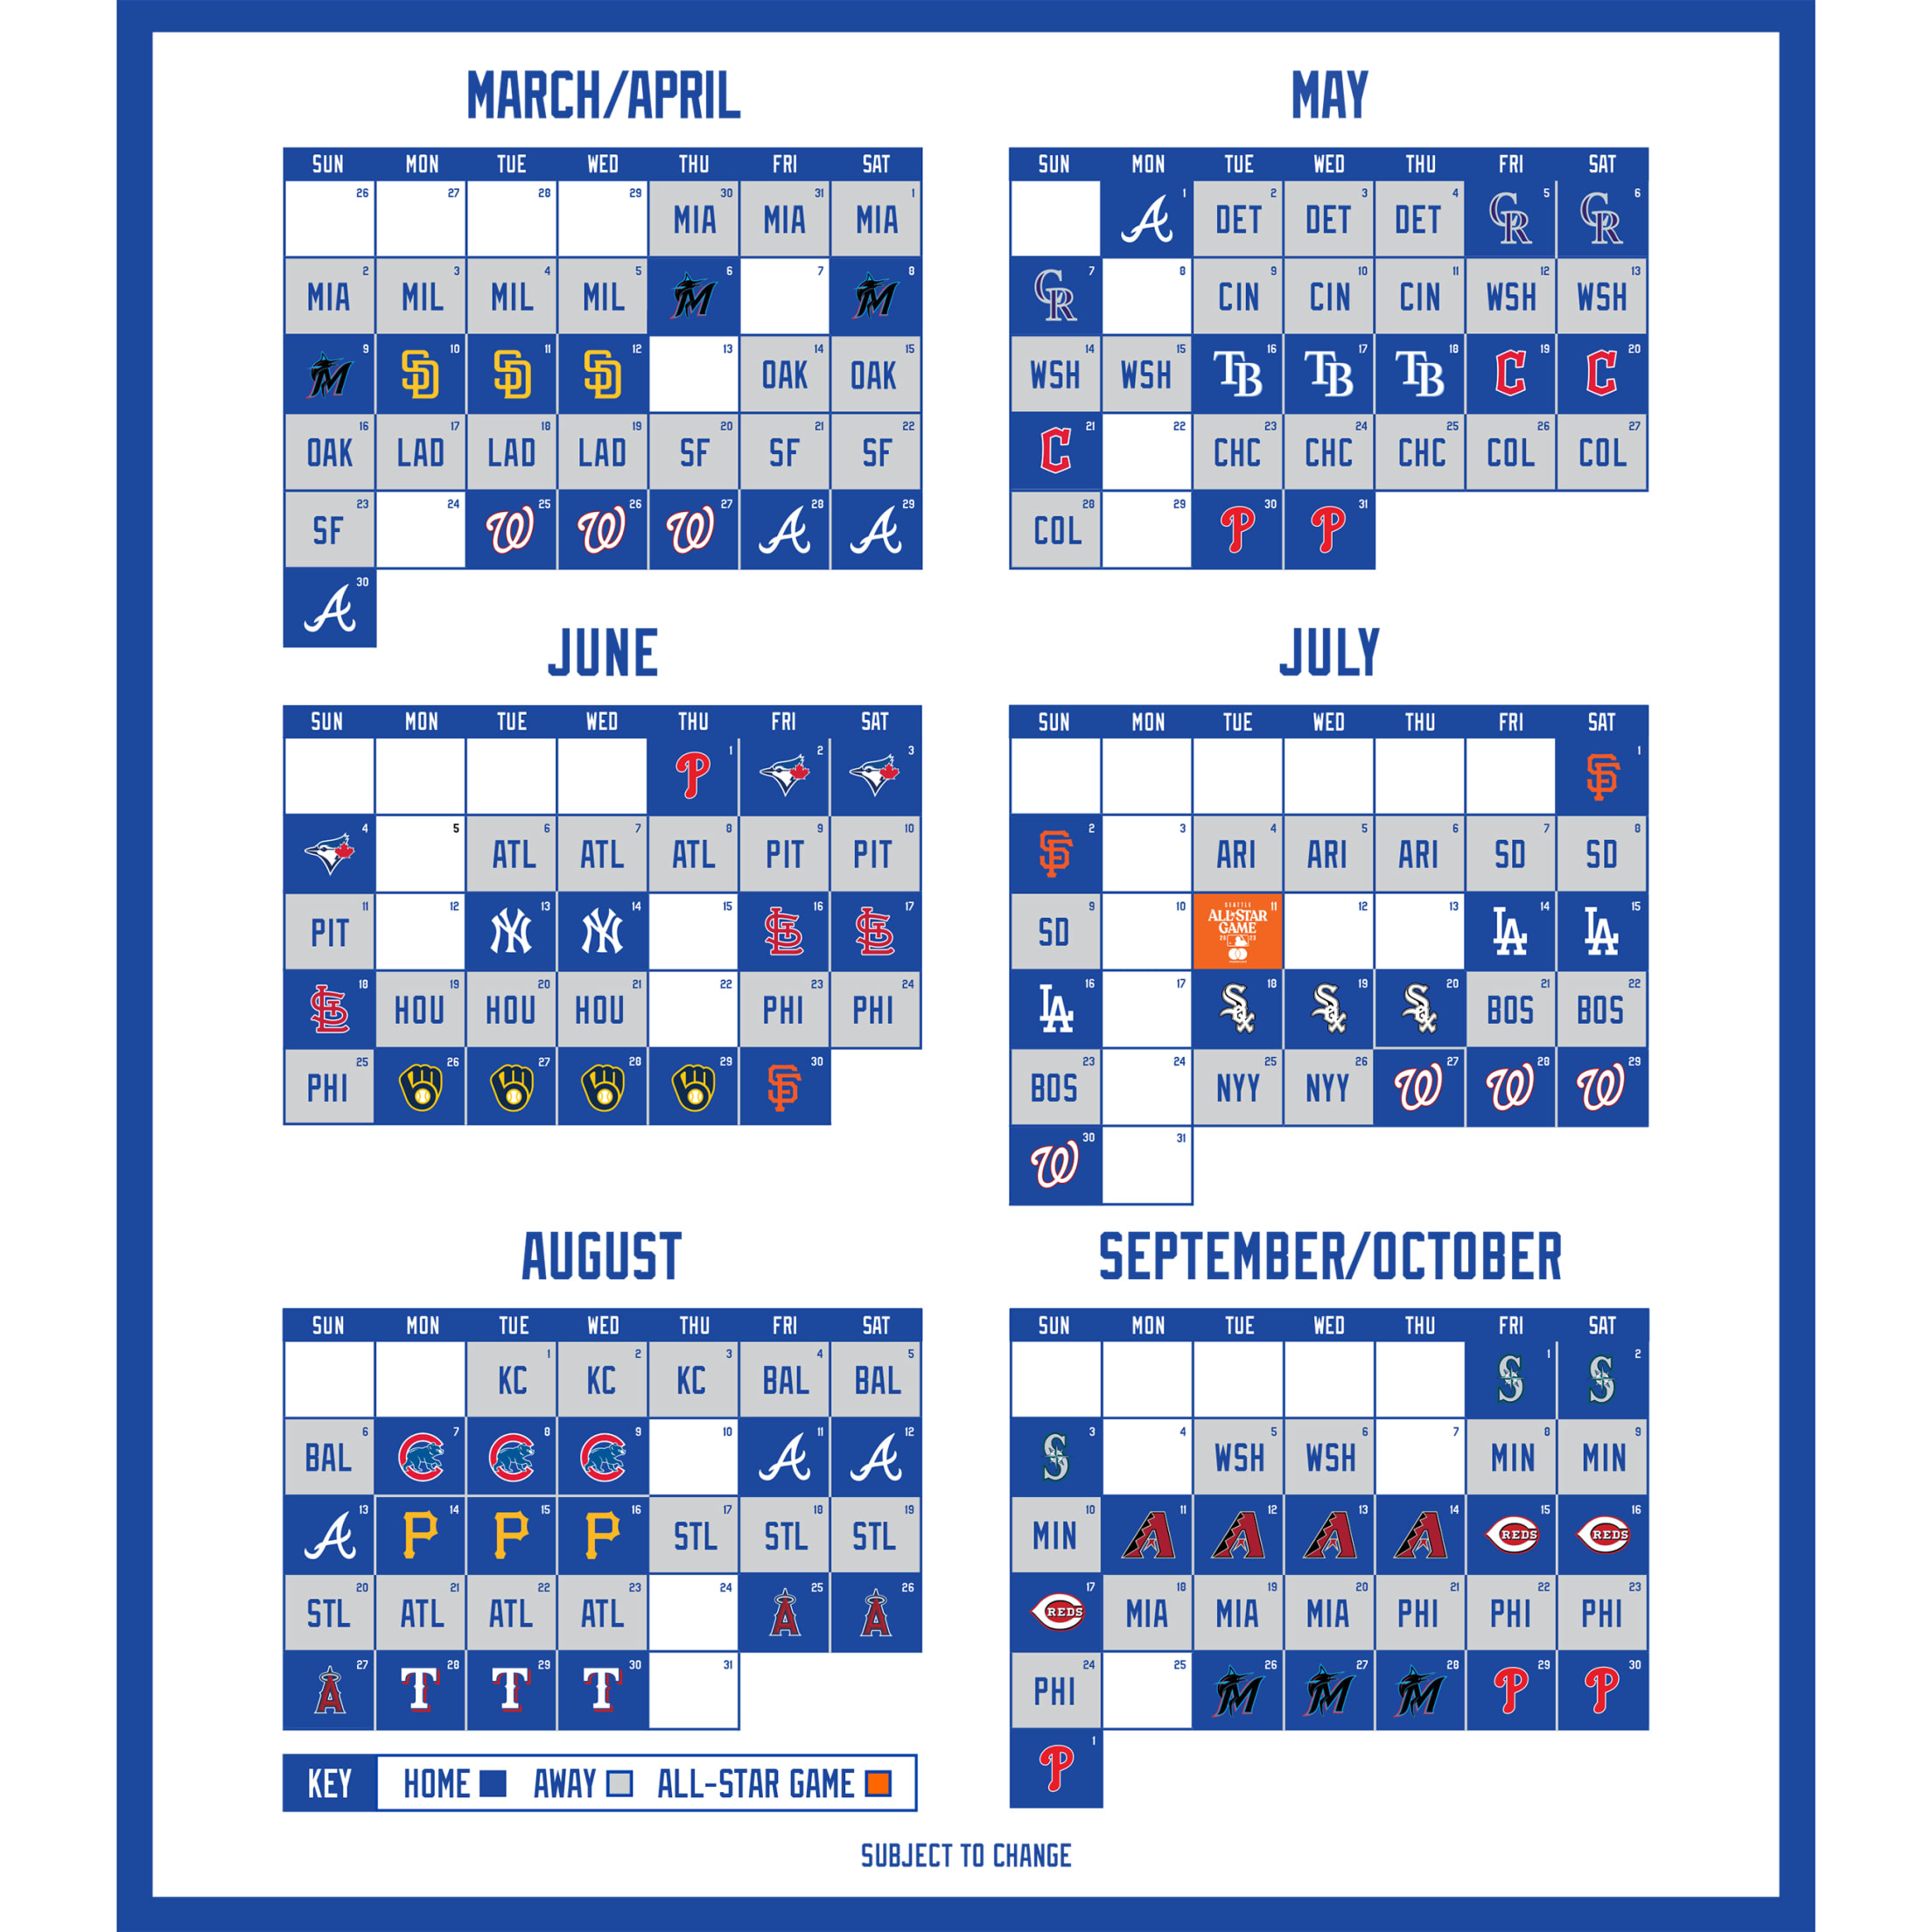 New York Mets Printable Schedule For The First Time In Franchise History The Mets Will Play